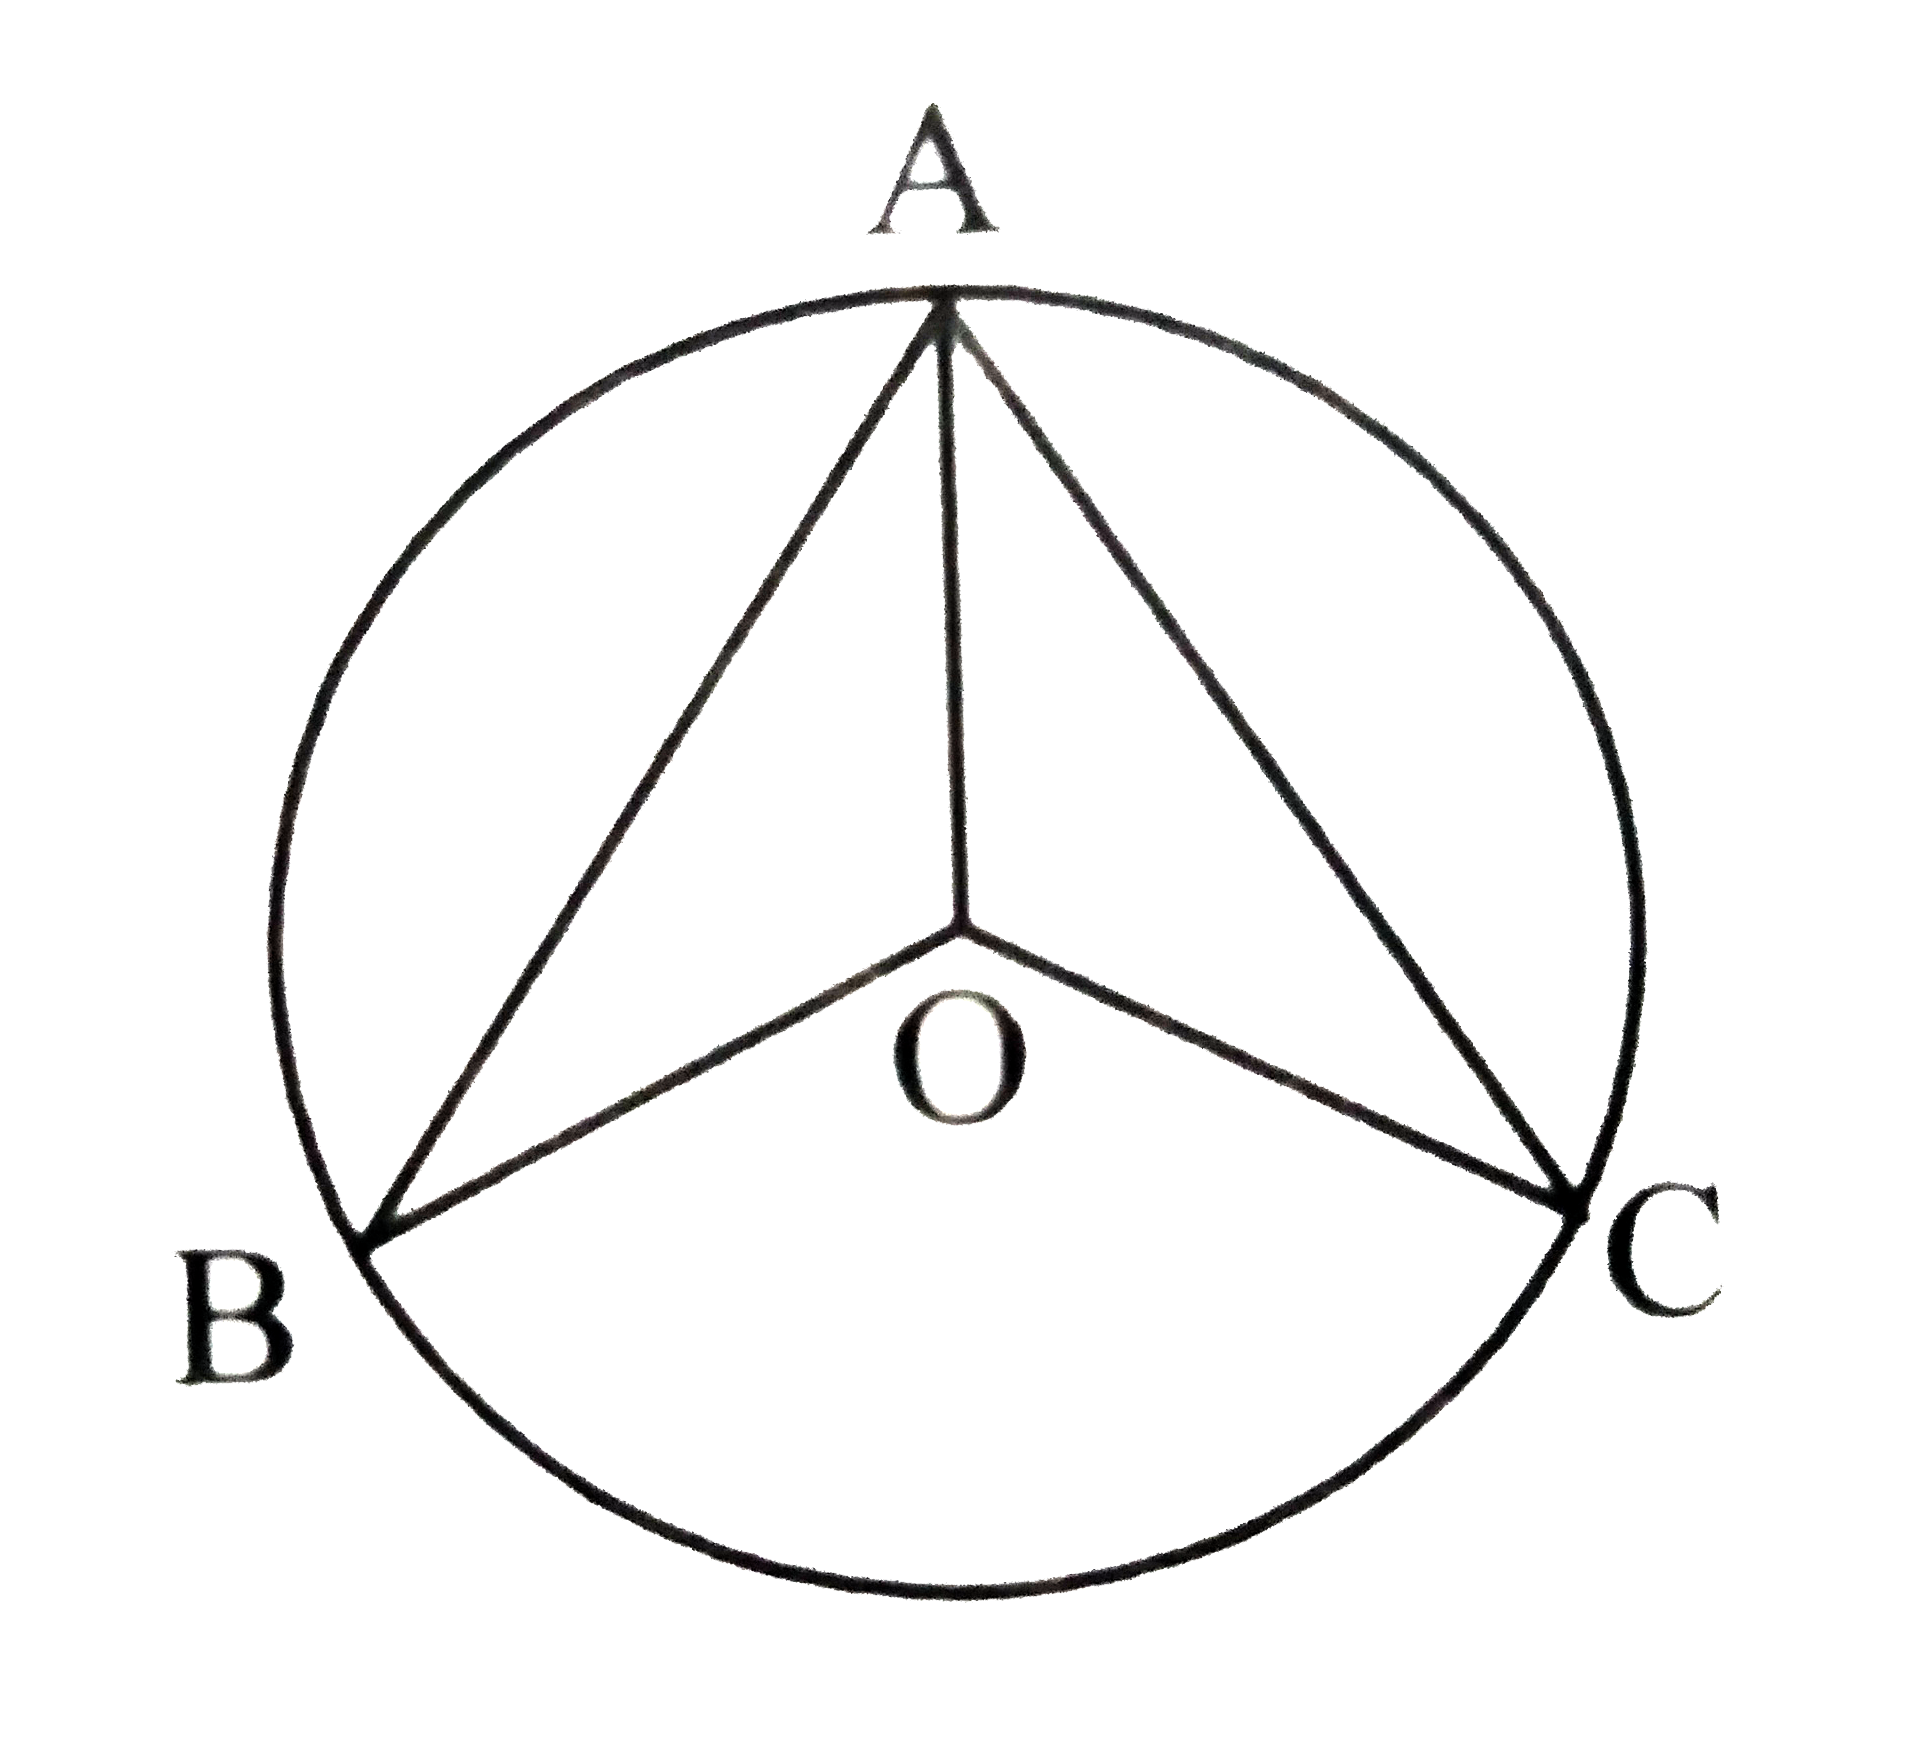 In the adjoining figure, A,B and C are three points on a circle with centre O such that mangleAOB=110^@, mangleAOC=120^@. Find mangleBAC.